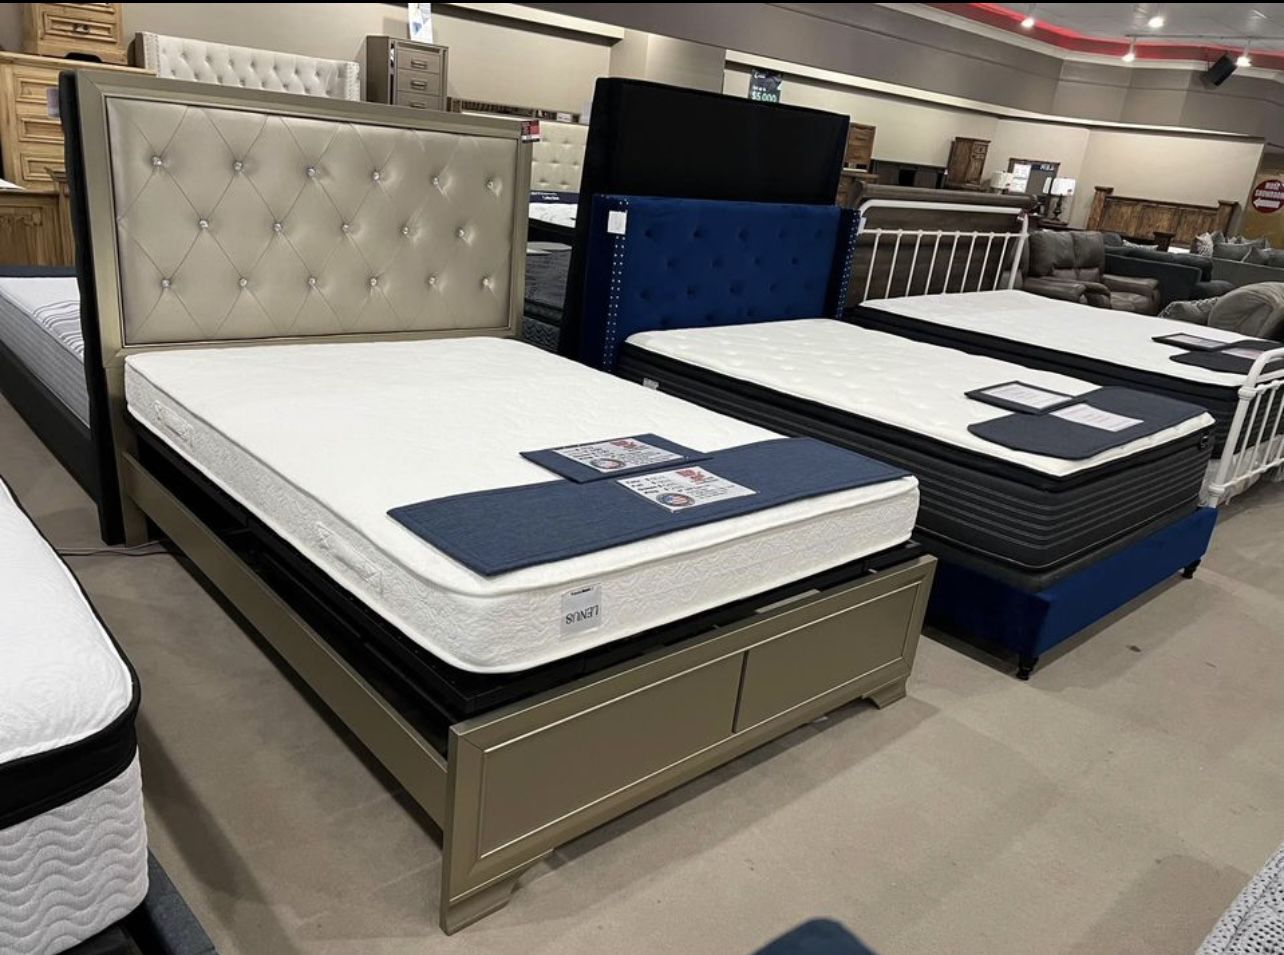 ‼️NEW YEAR SALE‼️ Queen Mattresses Starting At $199.00!